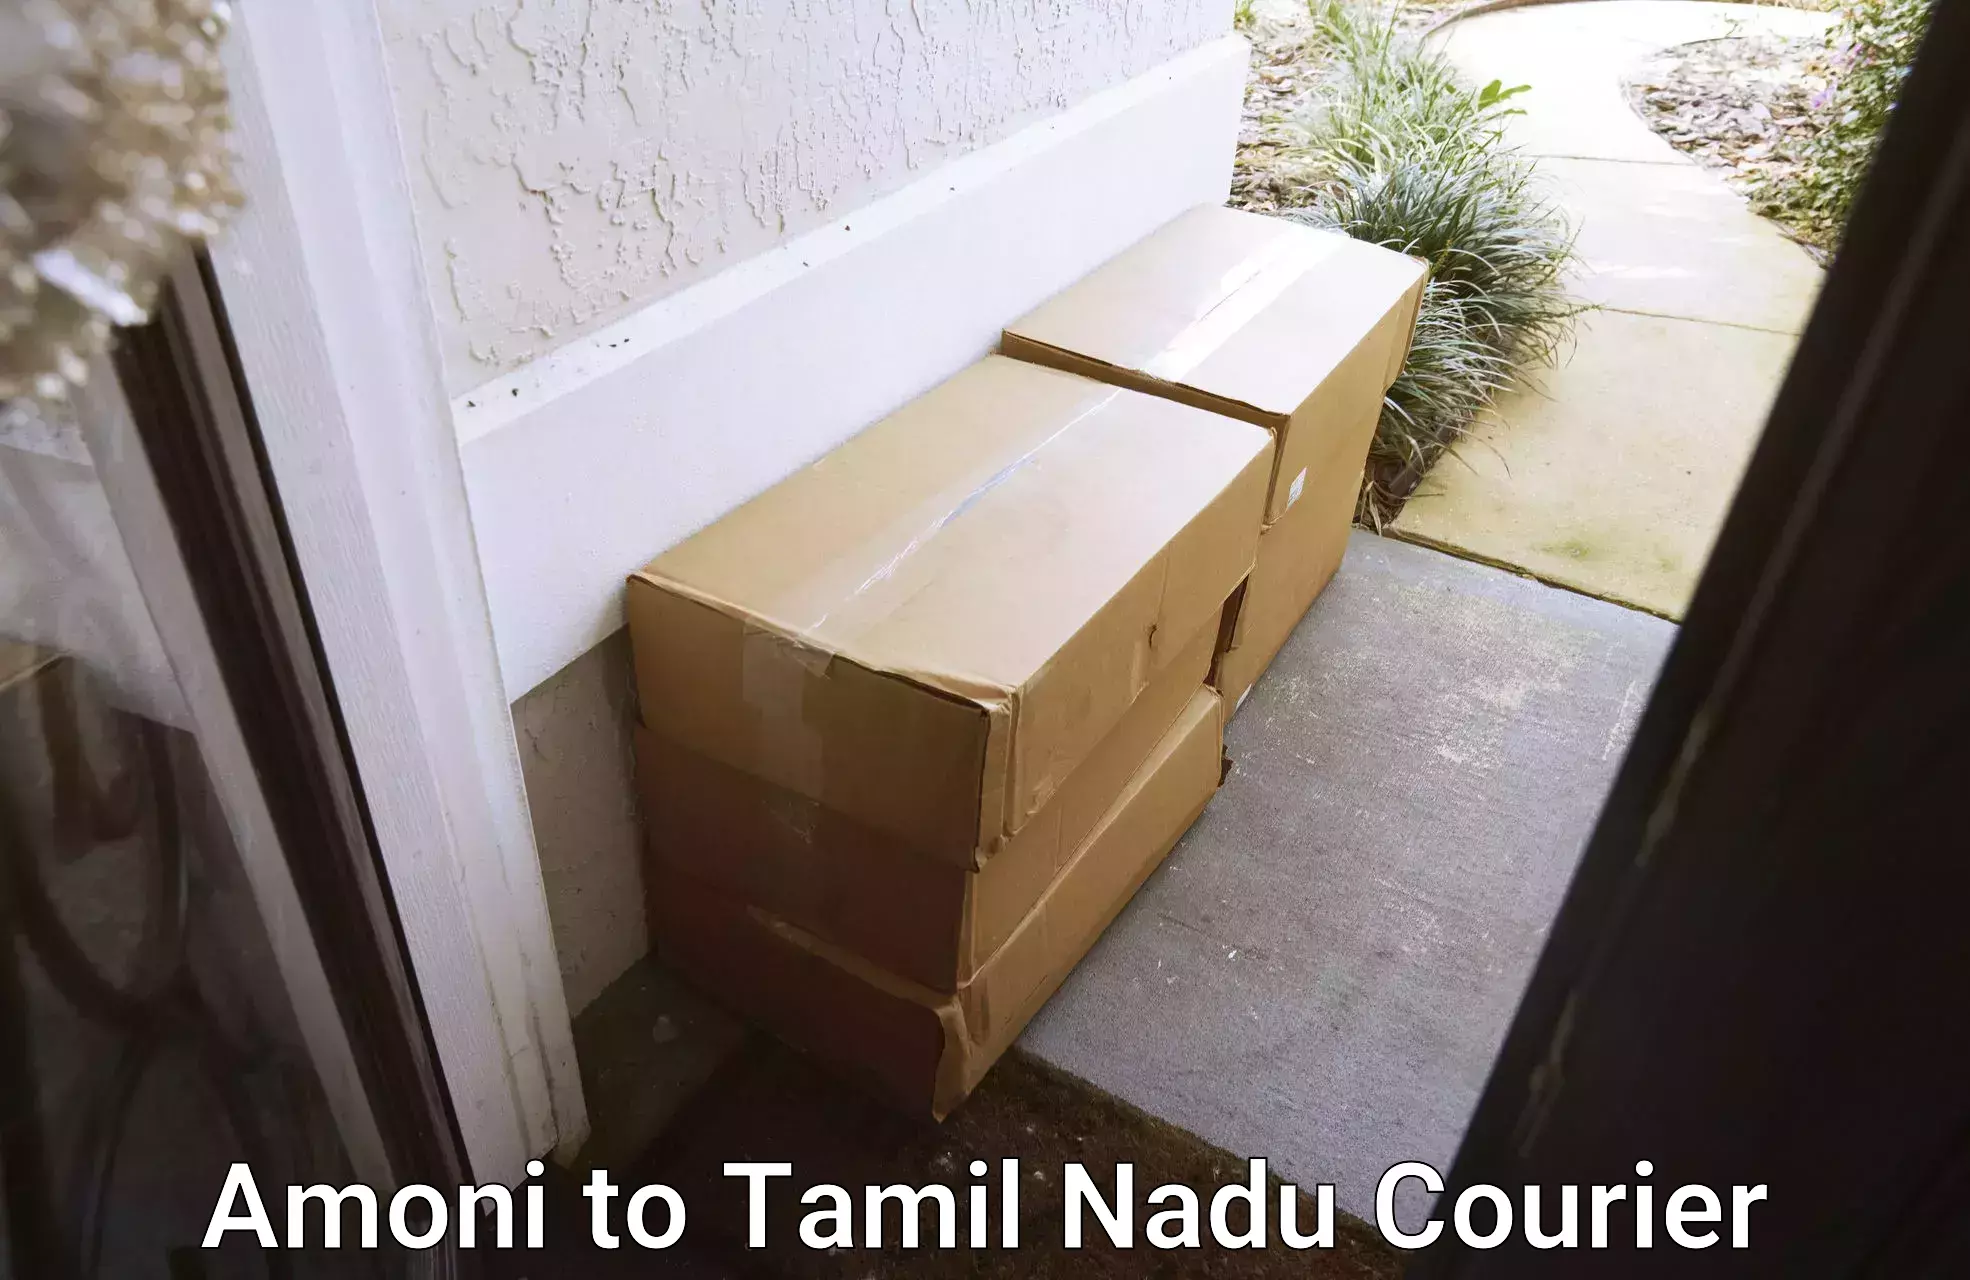 End-to-end delivery in Amoni to Ambattur